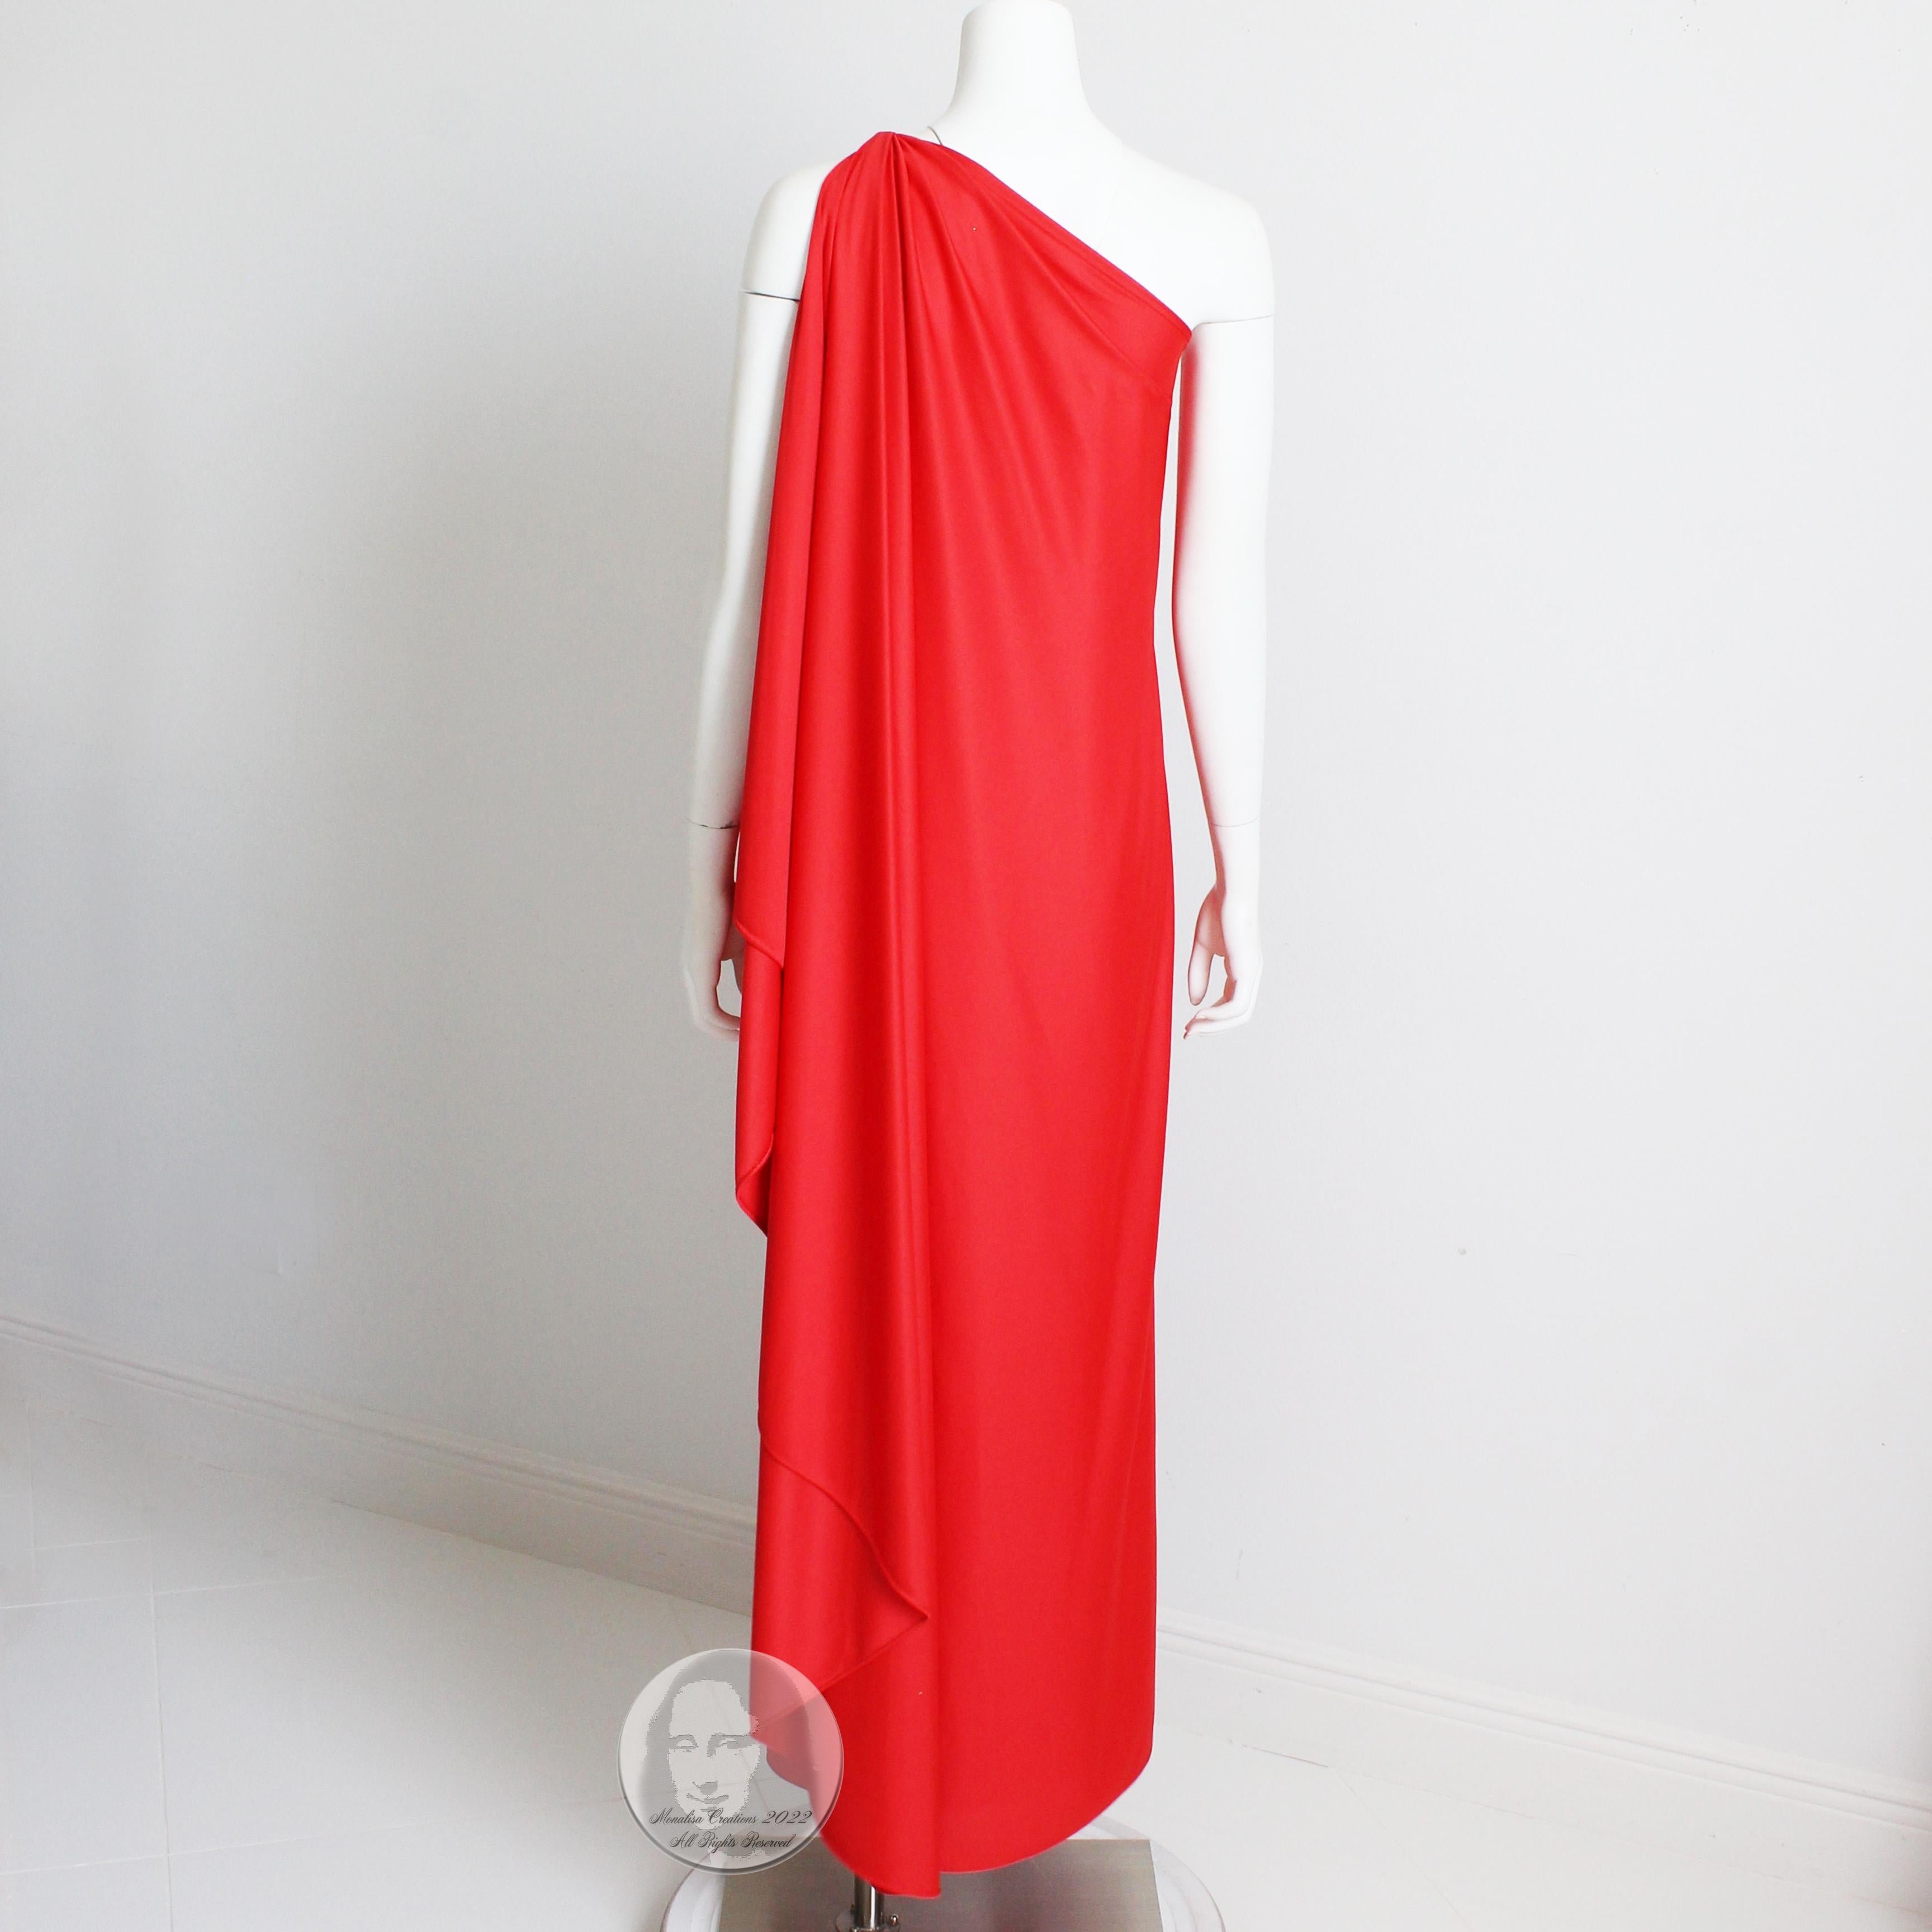 Women's or Men's 70s Halston Evening Gown One Shoulder Red Jersey Maxi Dress Draped NWT NOS